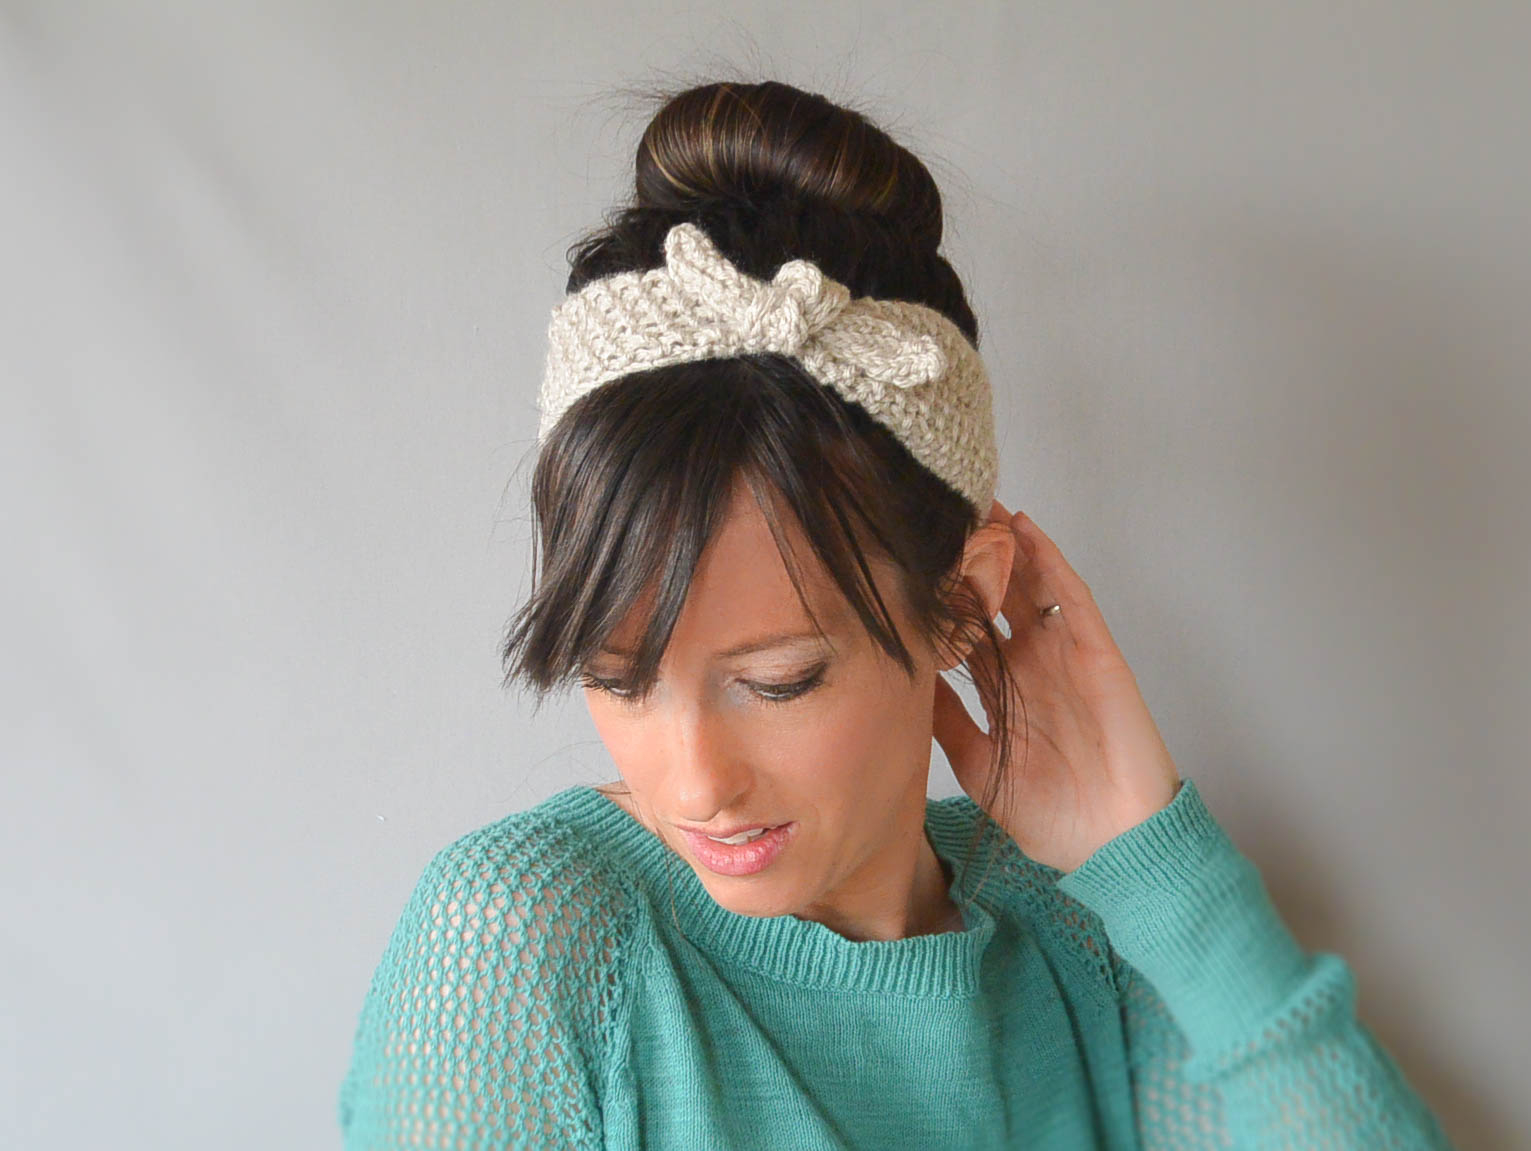 Knit Headband Pattern With Flower Knit Headband To Style Your Hair Crochet And Knitting Patterns 2019